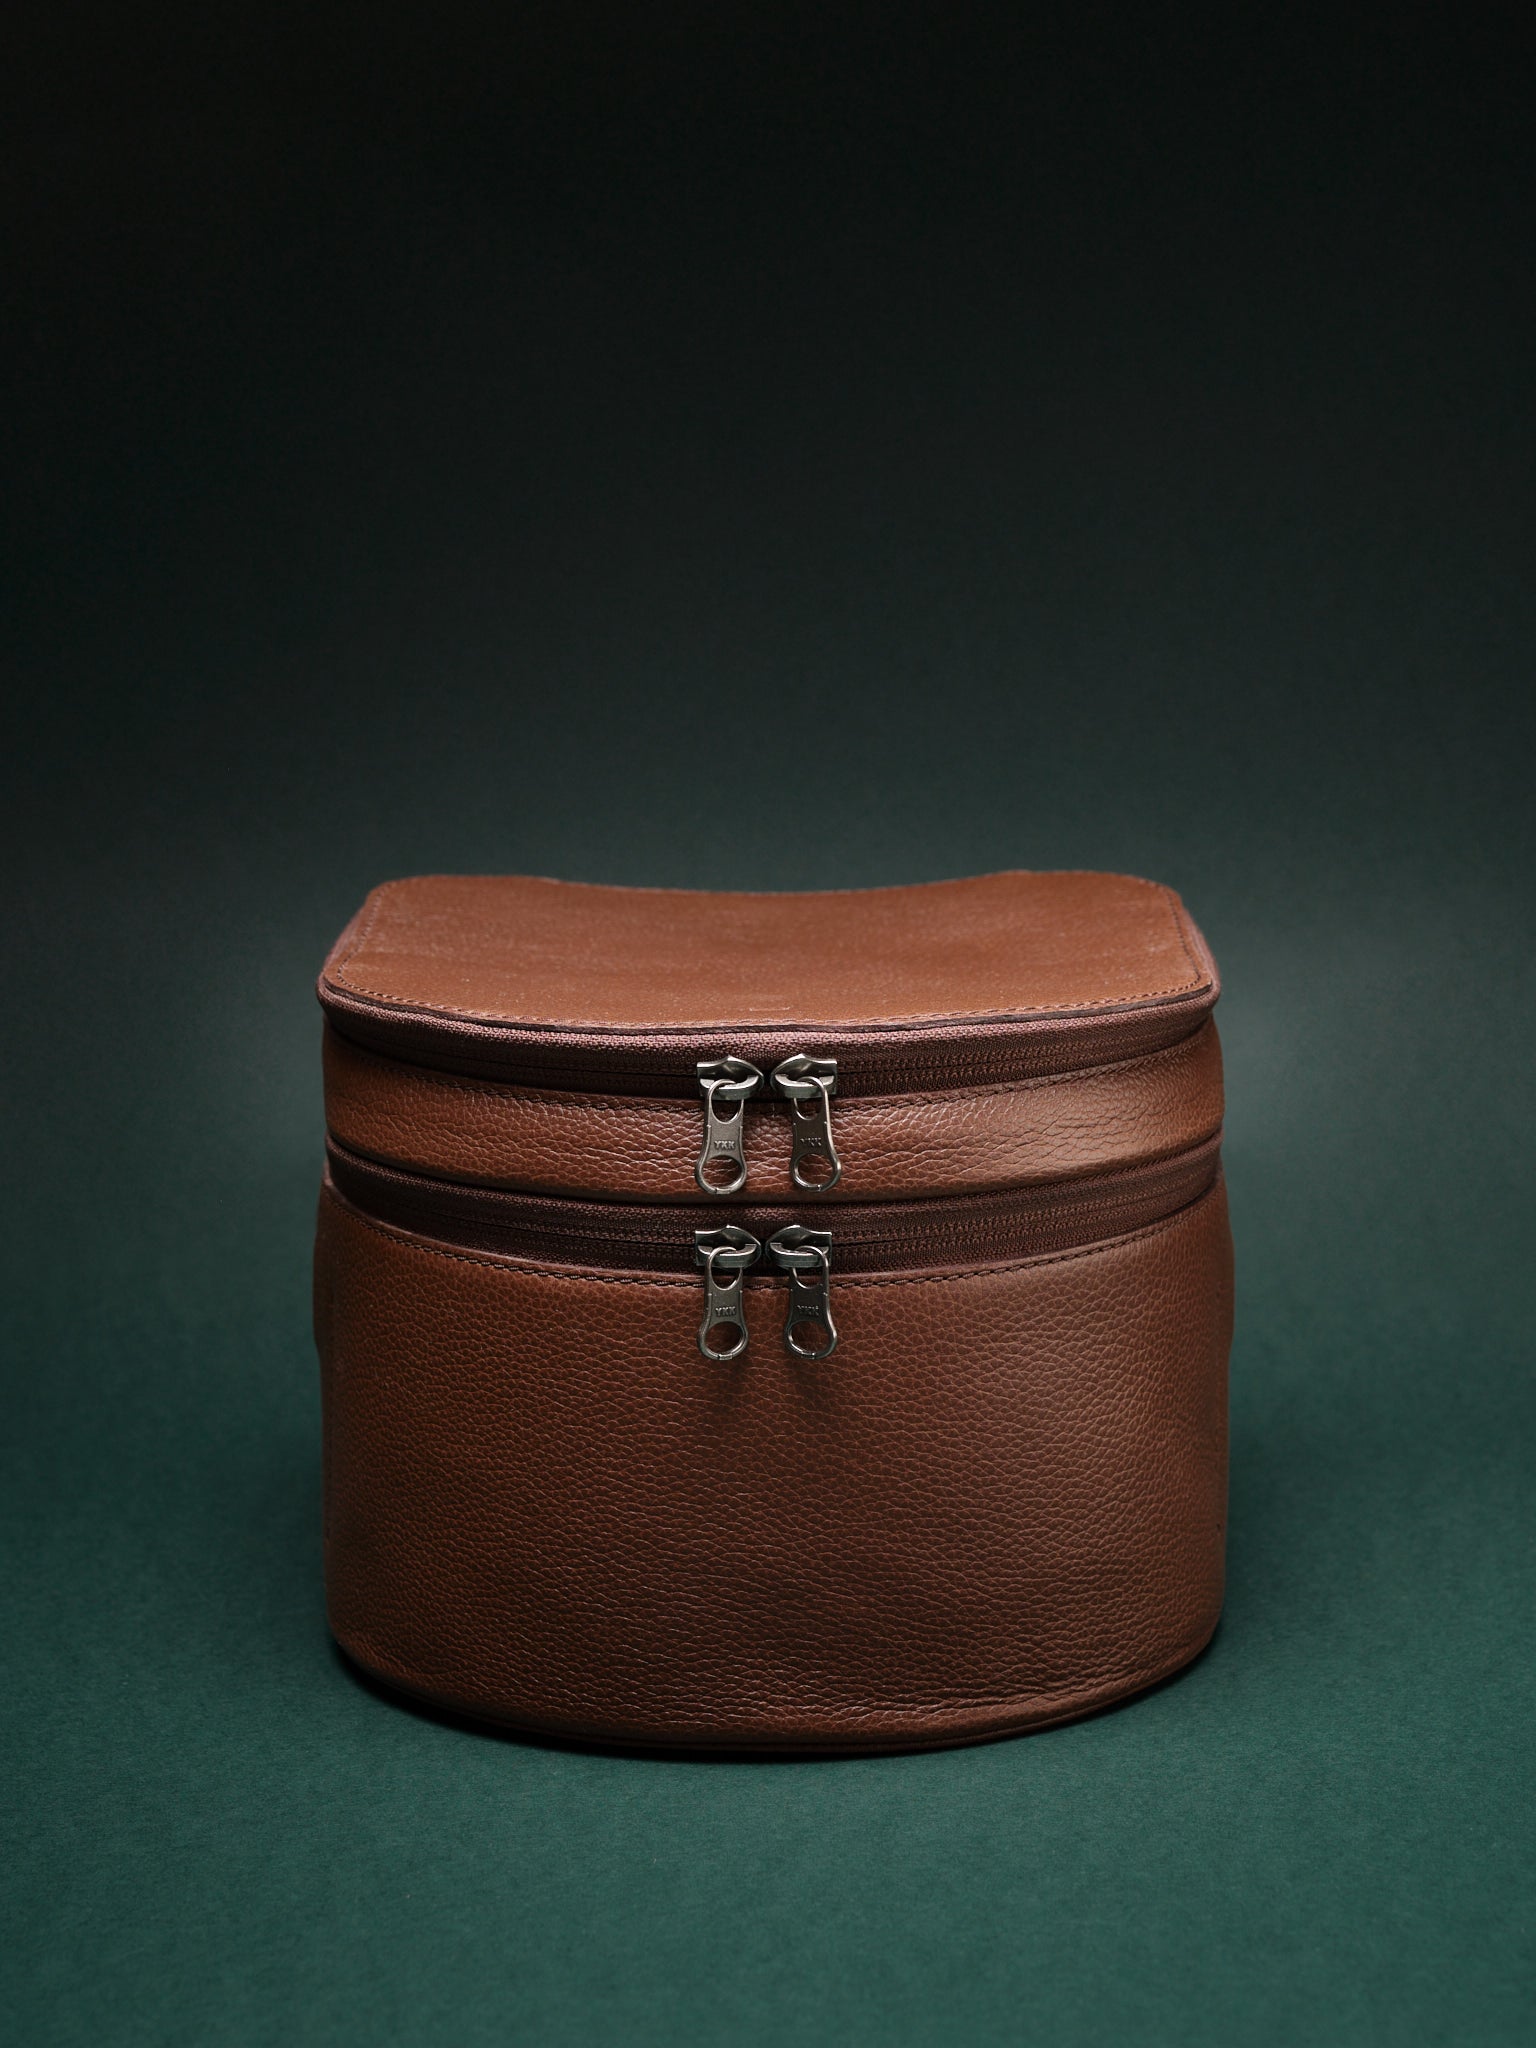 Leather Travel Case. VR Headset Case Brown by Capra